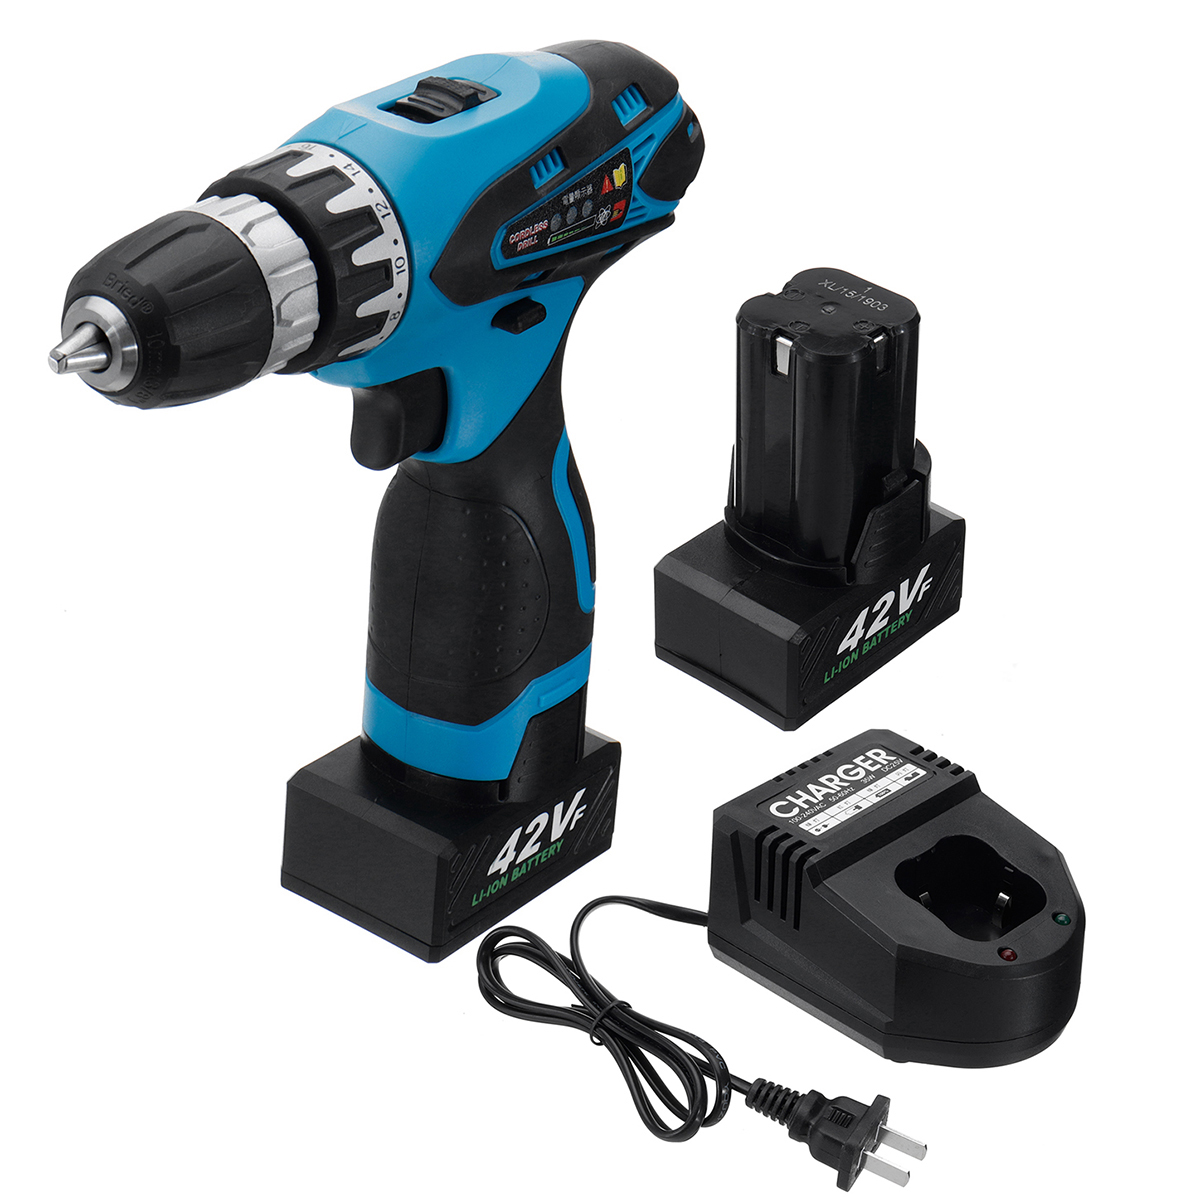 42V-9000mAh-Electric-Cordless-Drill-Driver-LED-2-Speed-Screwdriver-W-1-or-2-Li-Ion-Battery-1451594-10